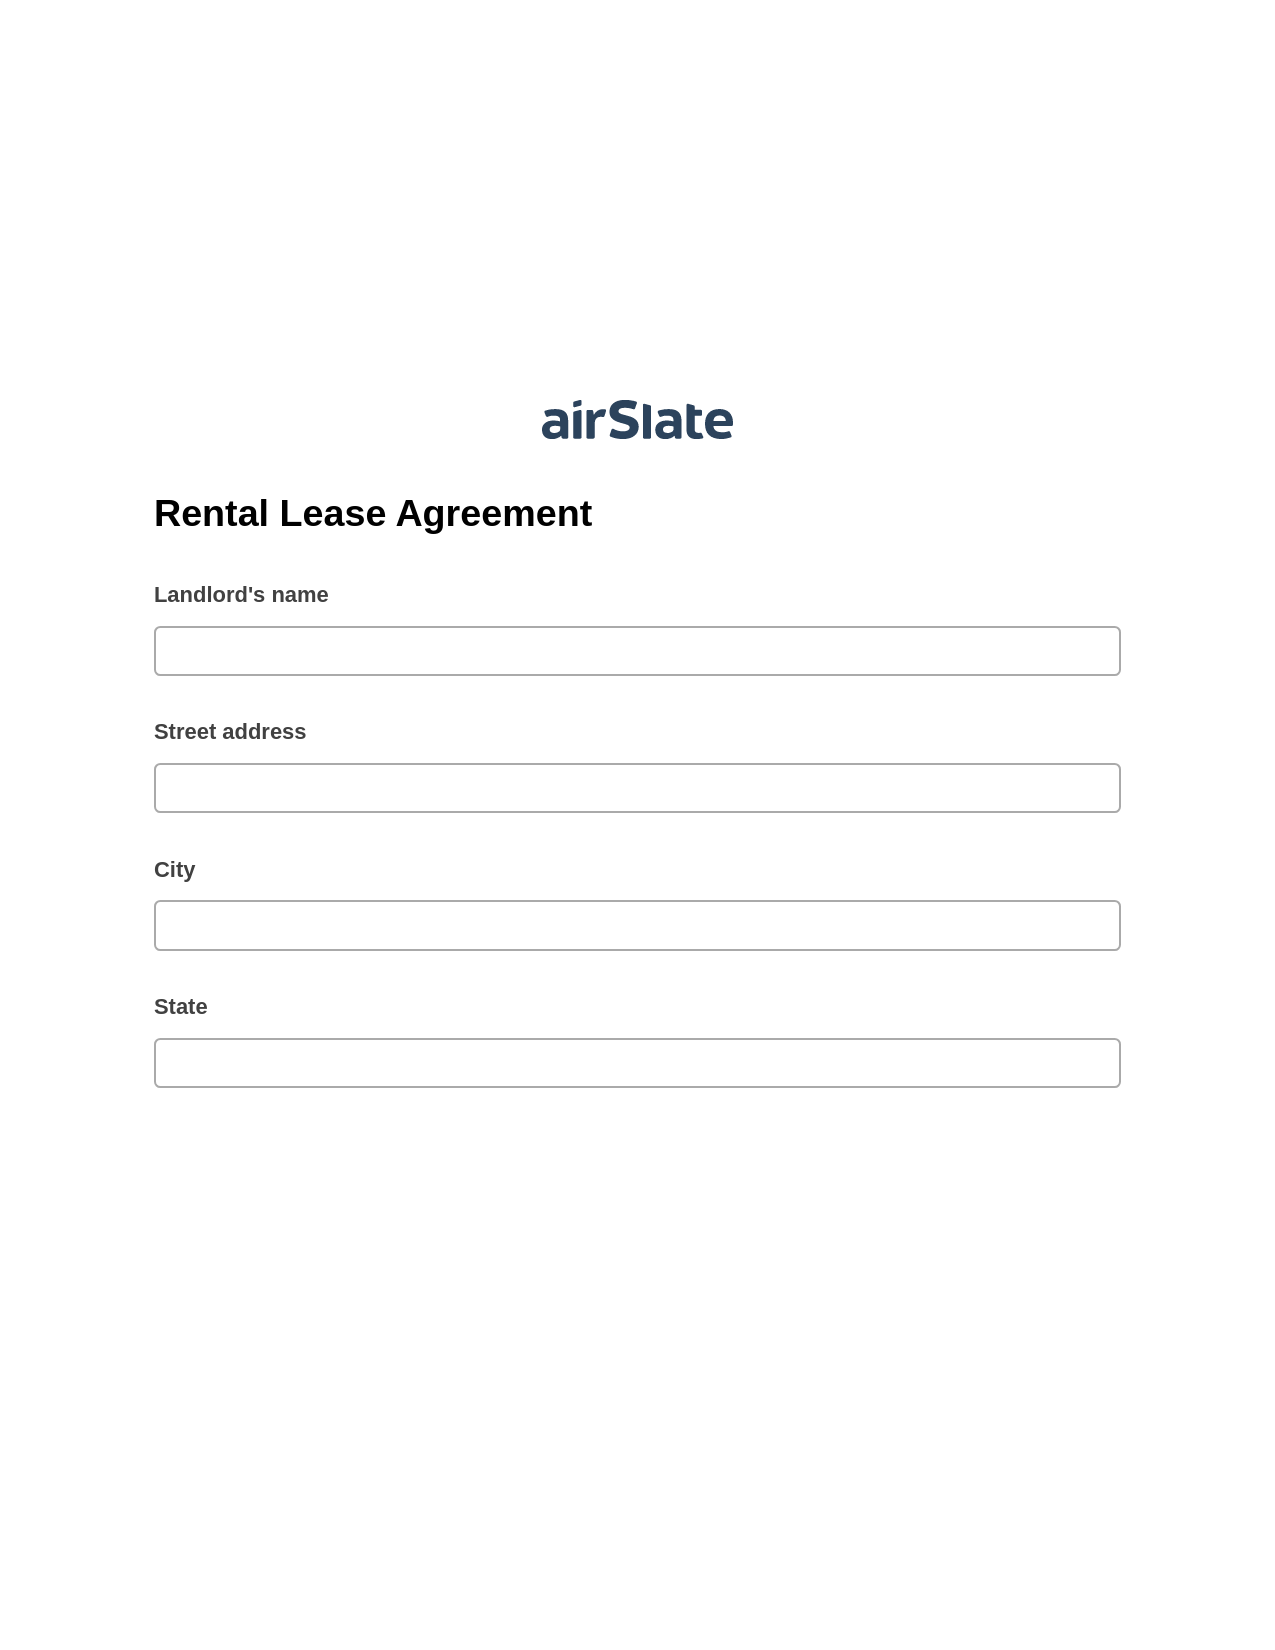 Rental Lease Agreement Pre-fill from Salesforce Record Bot, Create MS Dynamics 365 Records Bot, Dropbox Bot